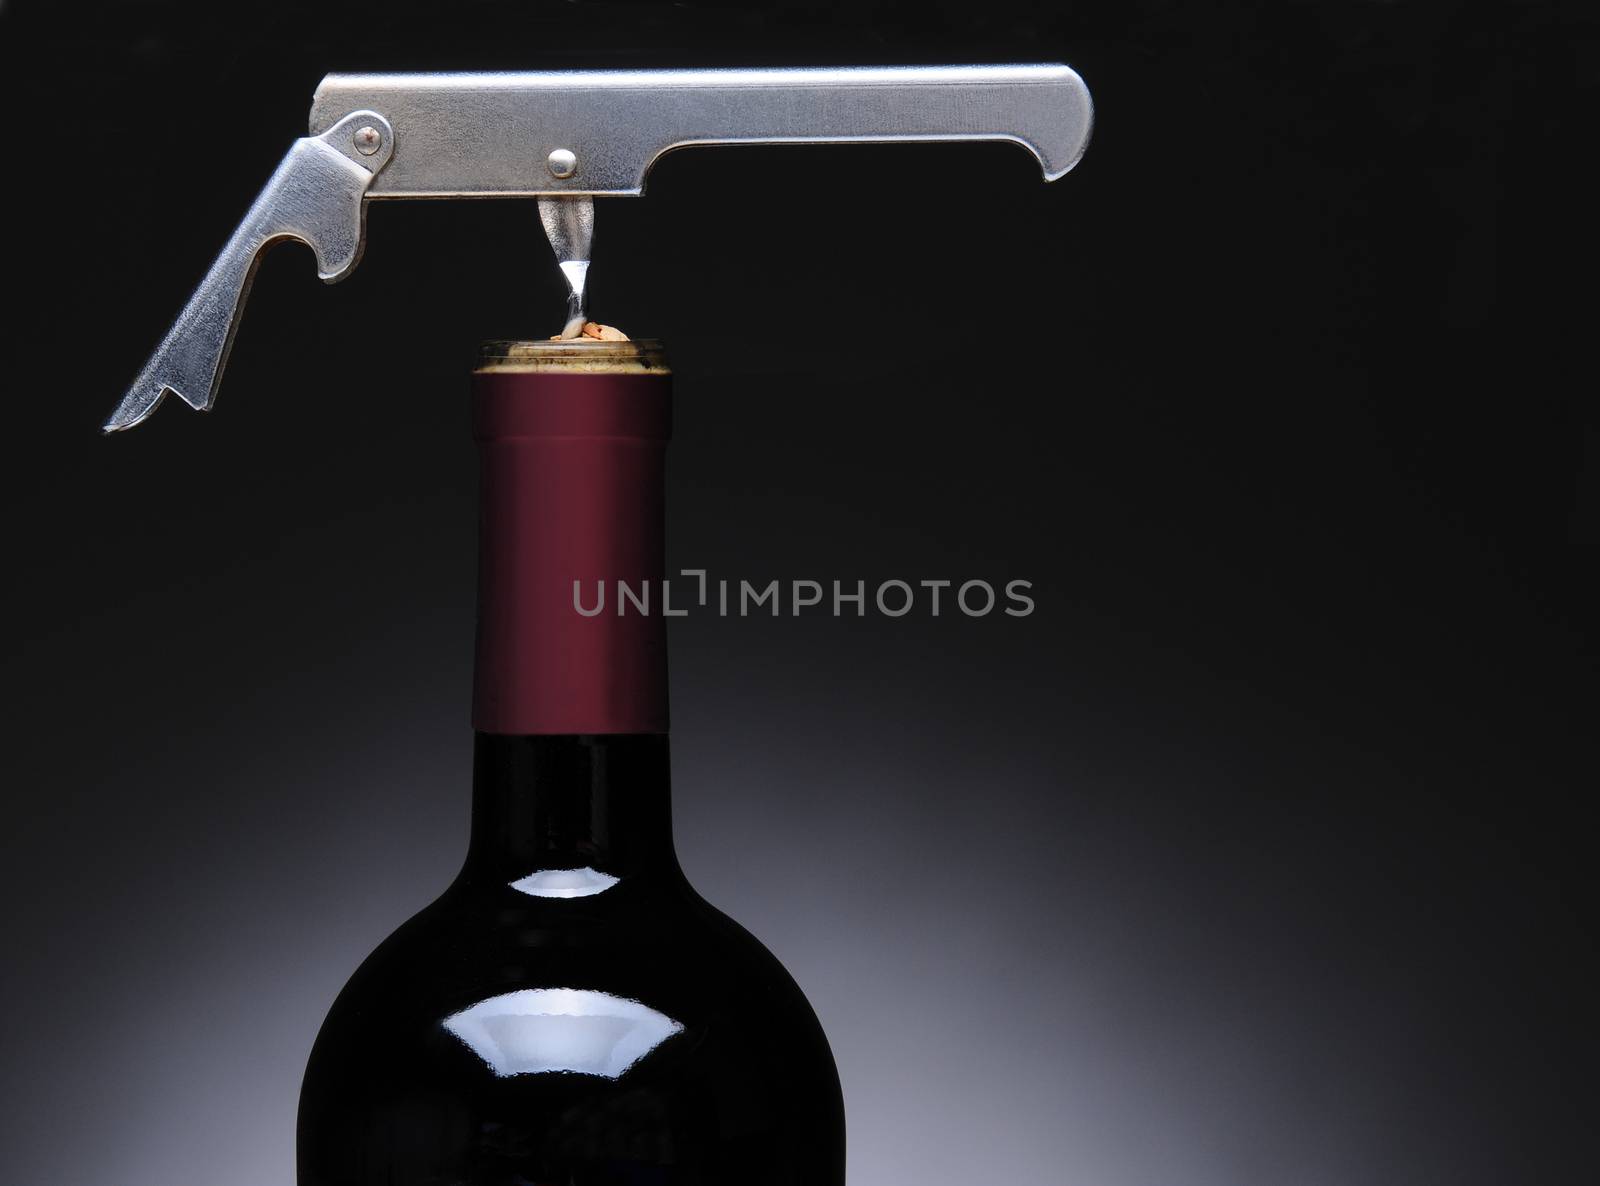 Closeup of a metal waiters corkscrew in a wine bottle. Horizontal format over a light to dark gray background.